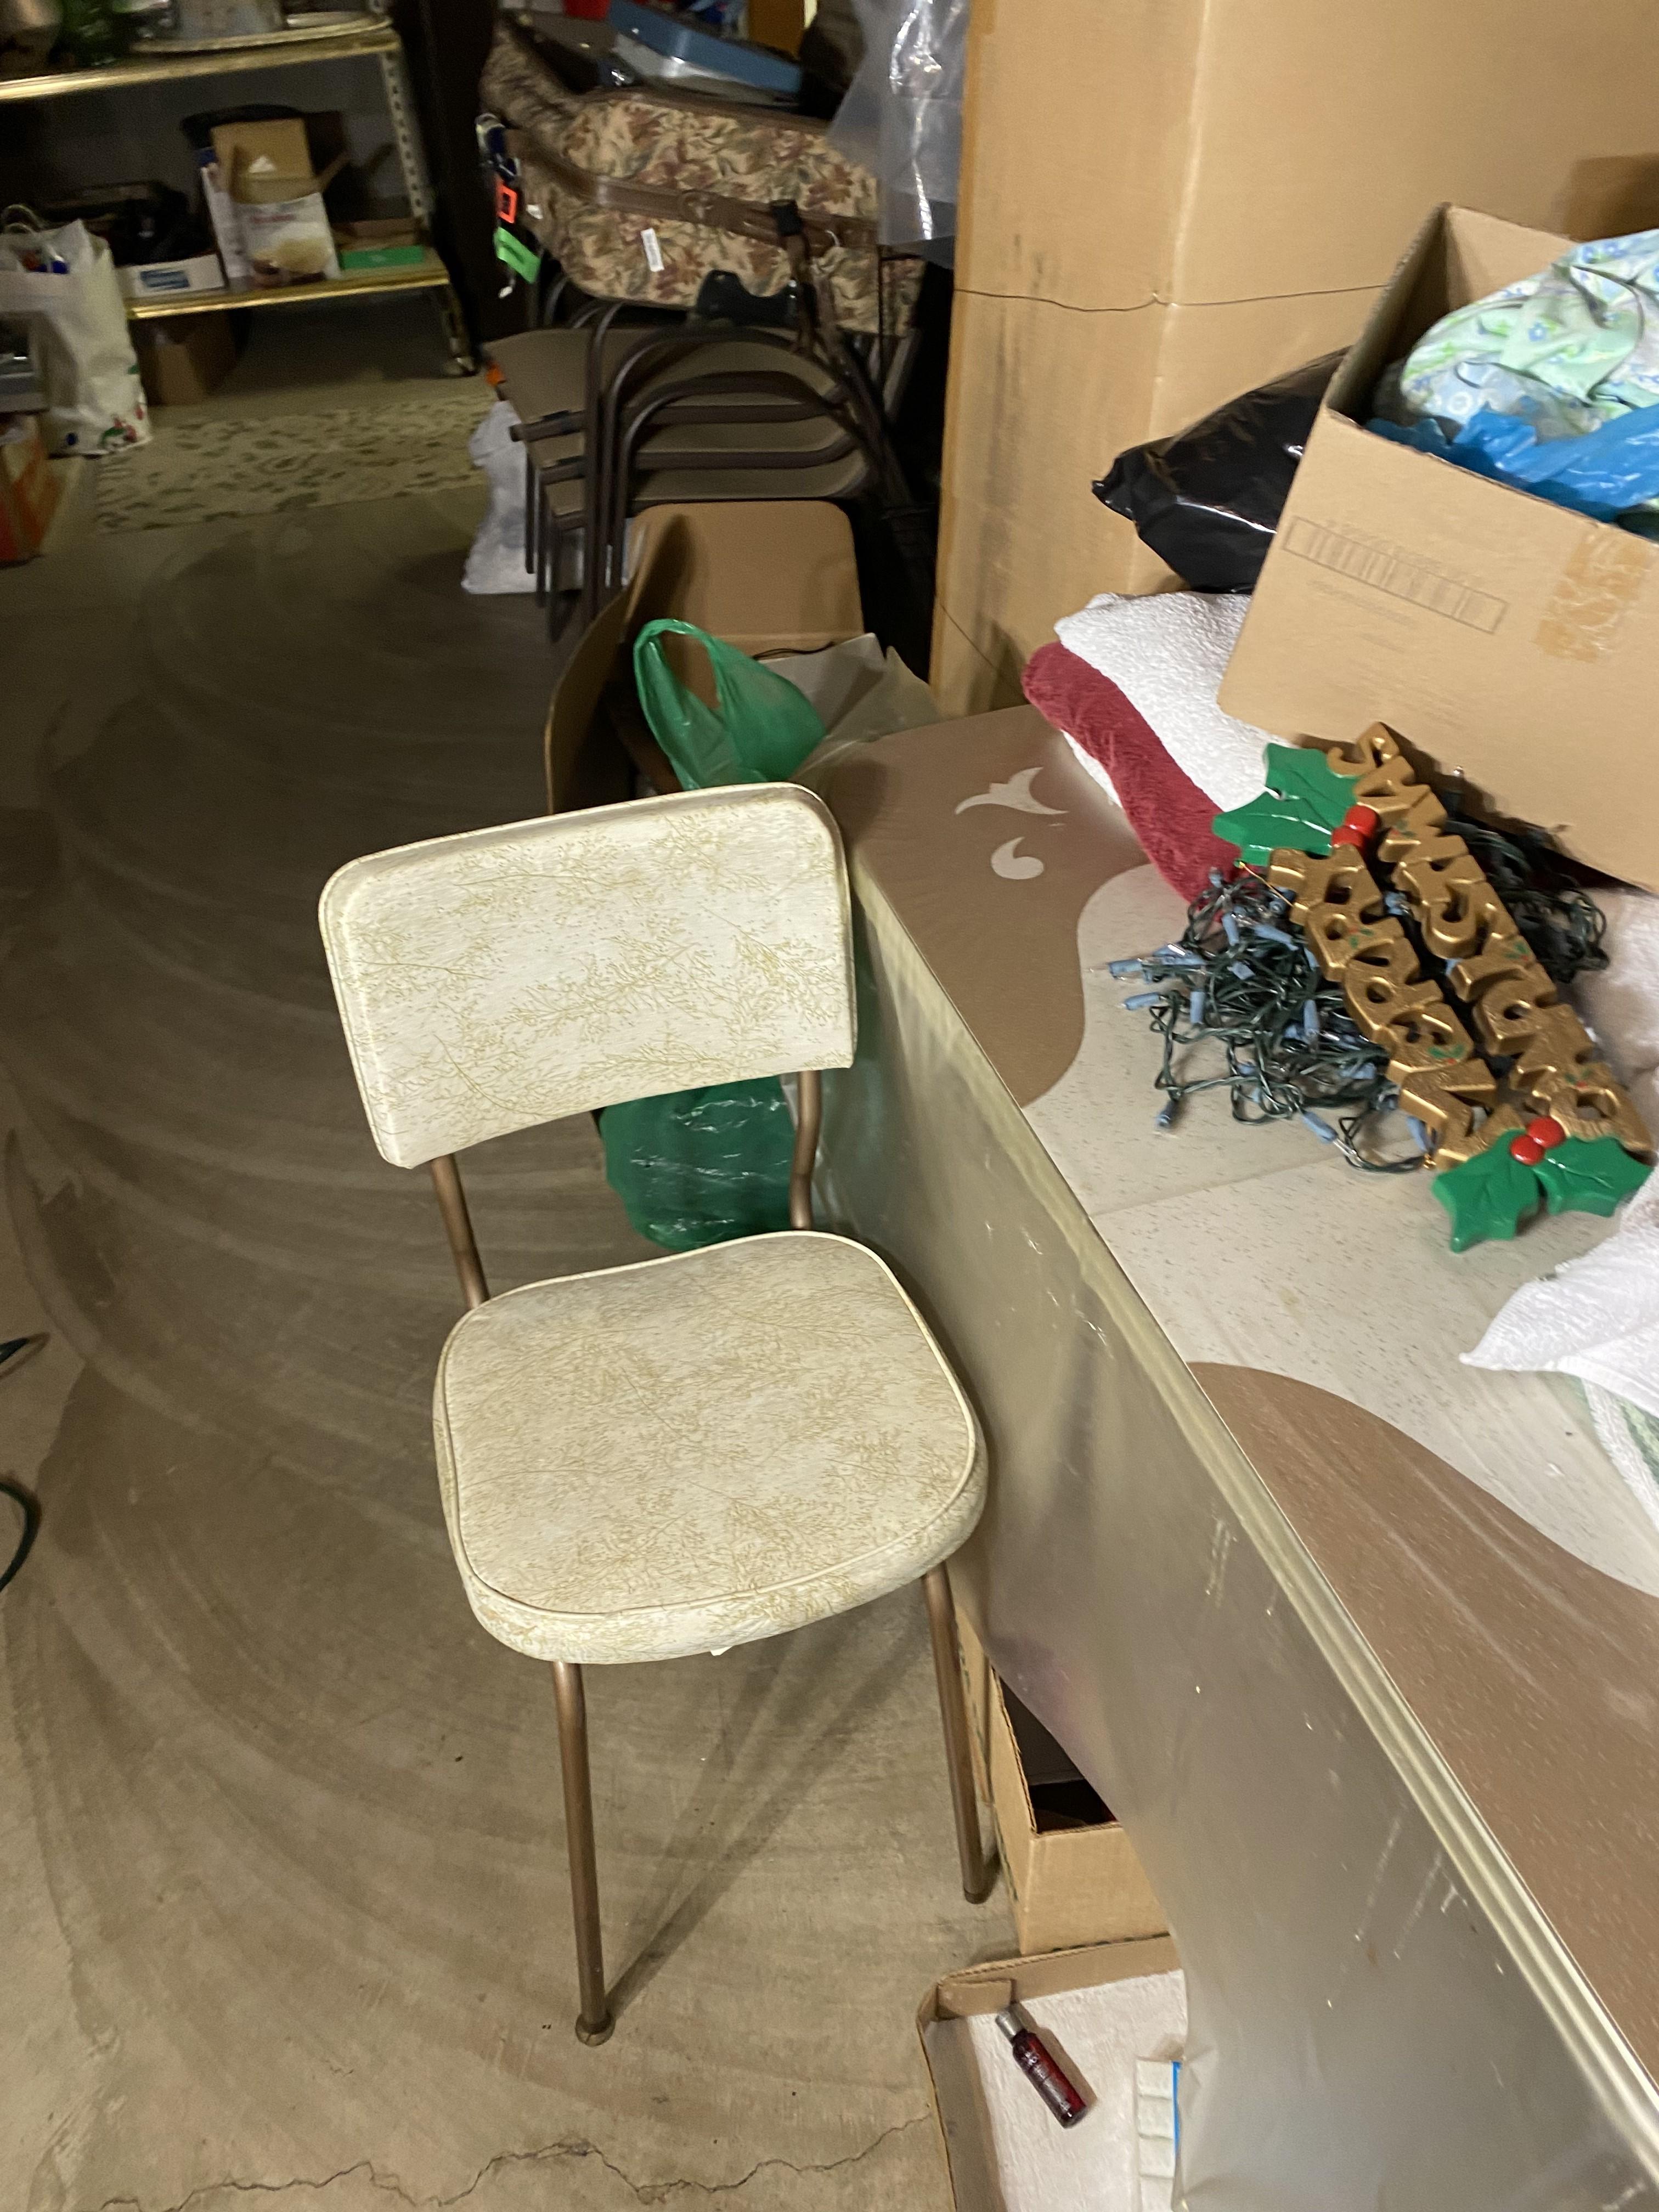 Area Clean Out Lot including Vintage Table, Chair